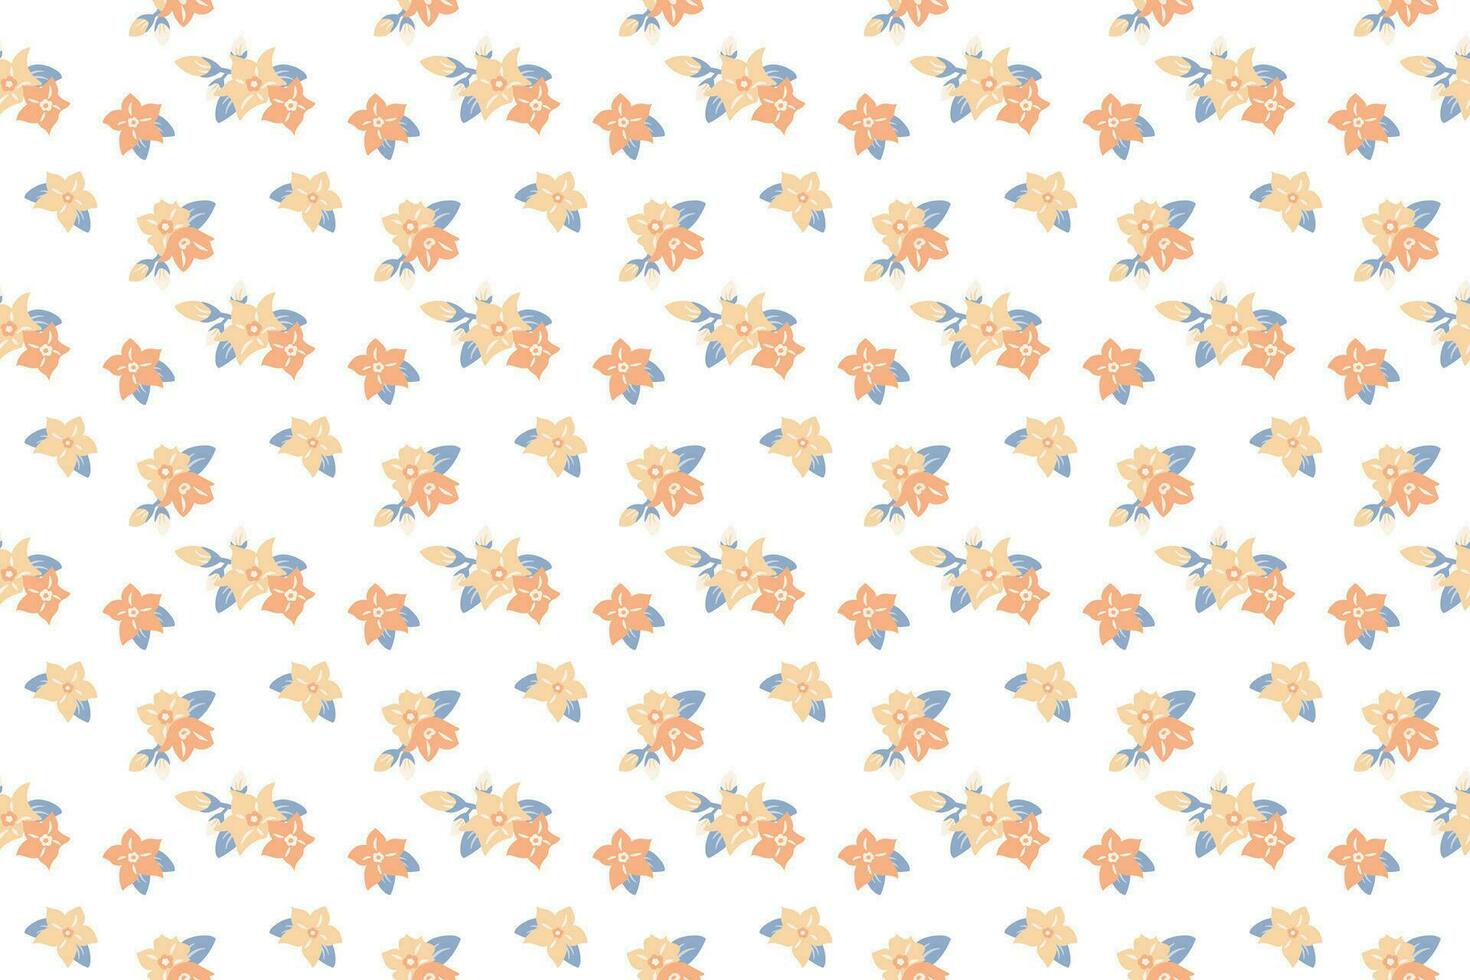 A tiny orange shade flower as seamless pattern background vector